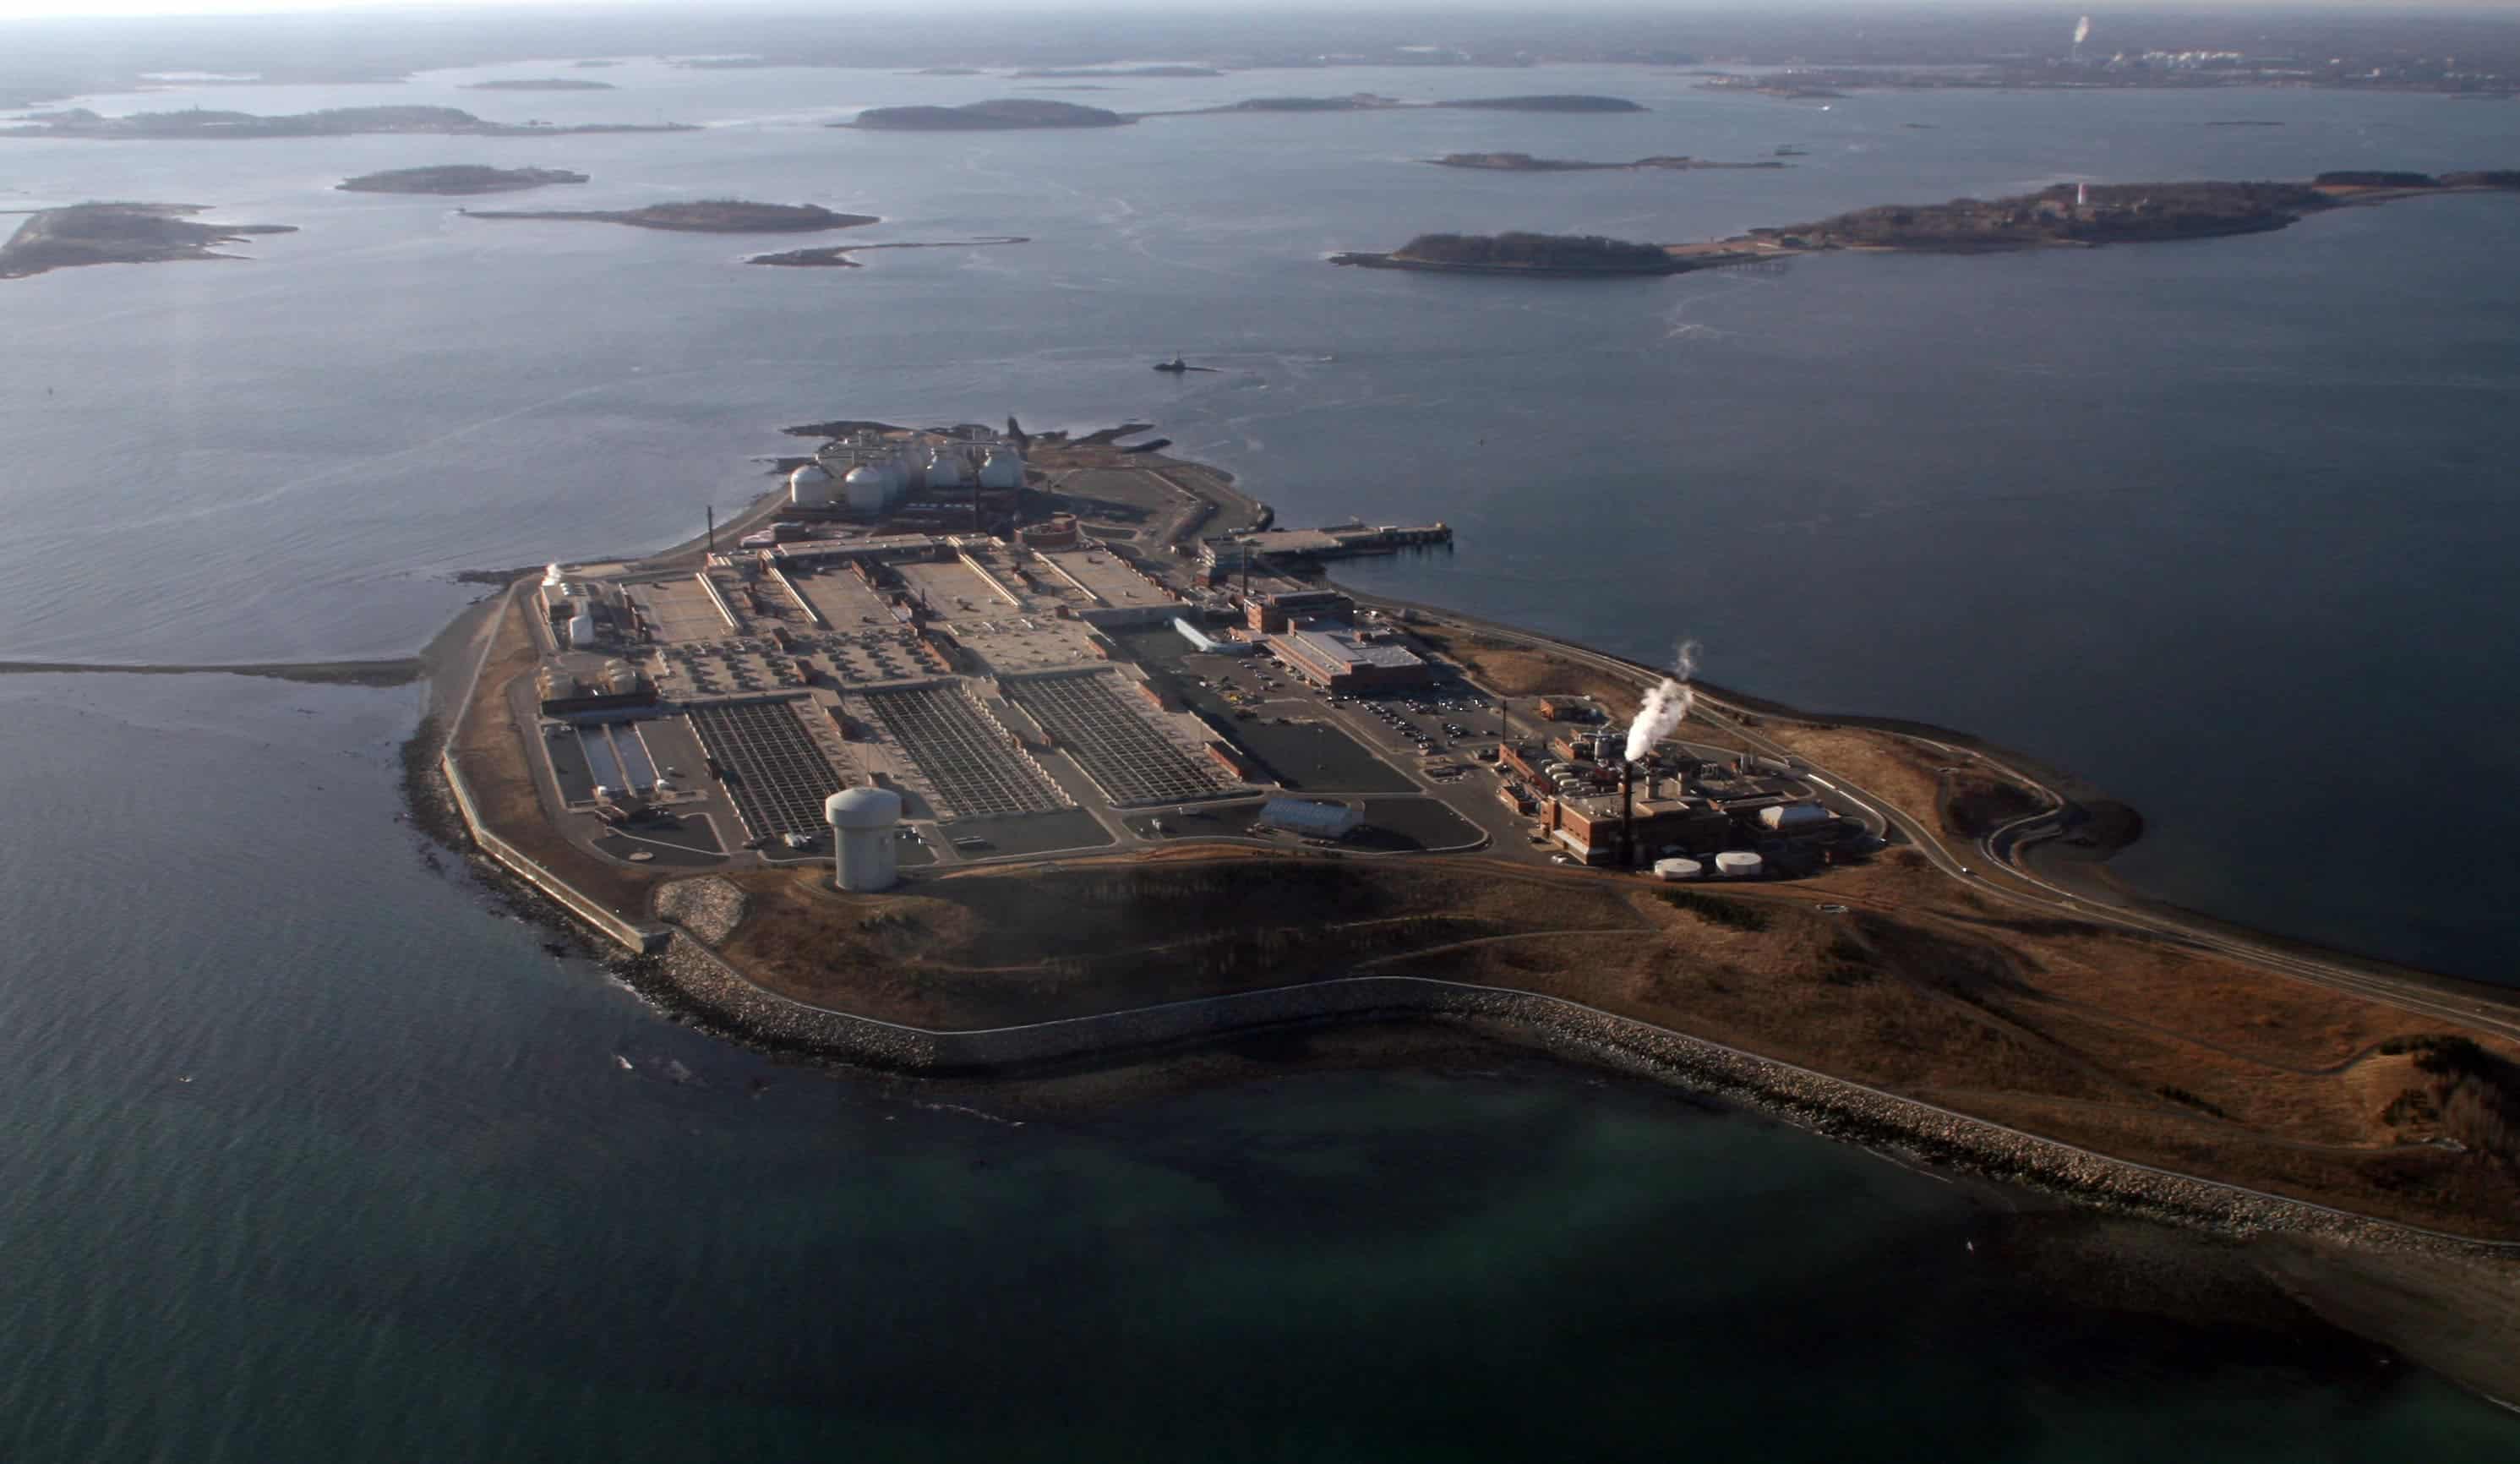 Deer Island wastewater treatment plant. Credit: Wikimedia Commons.